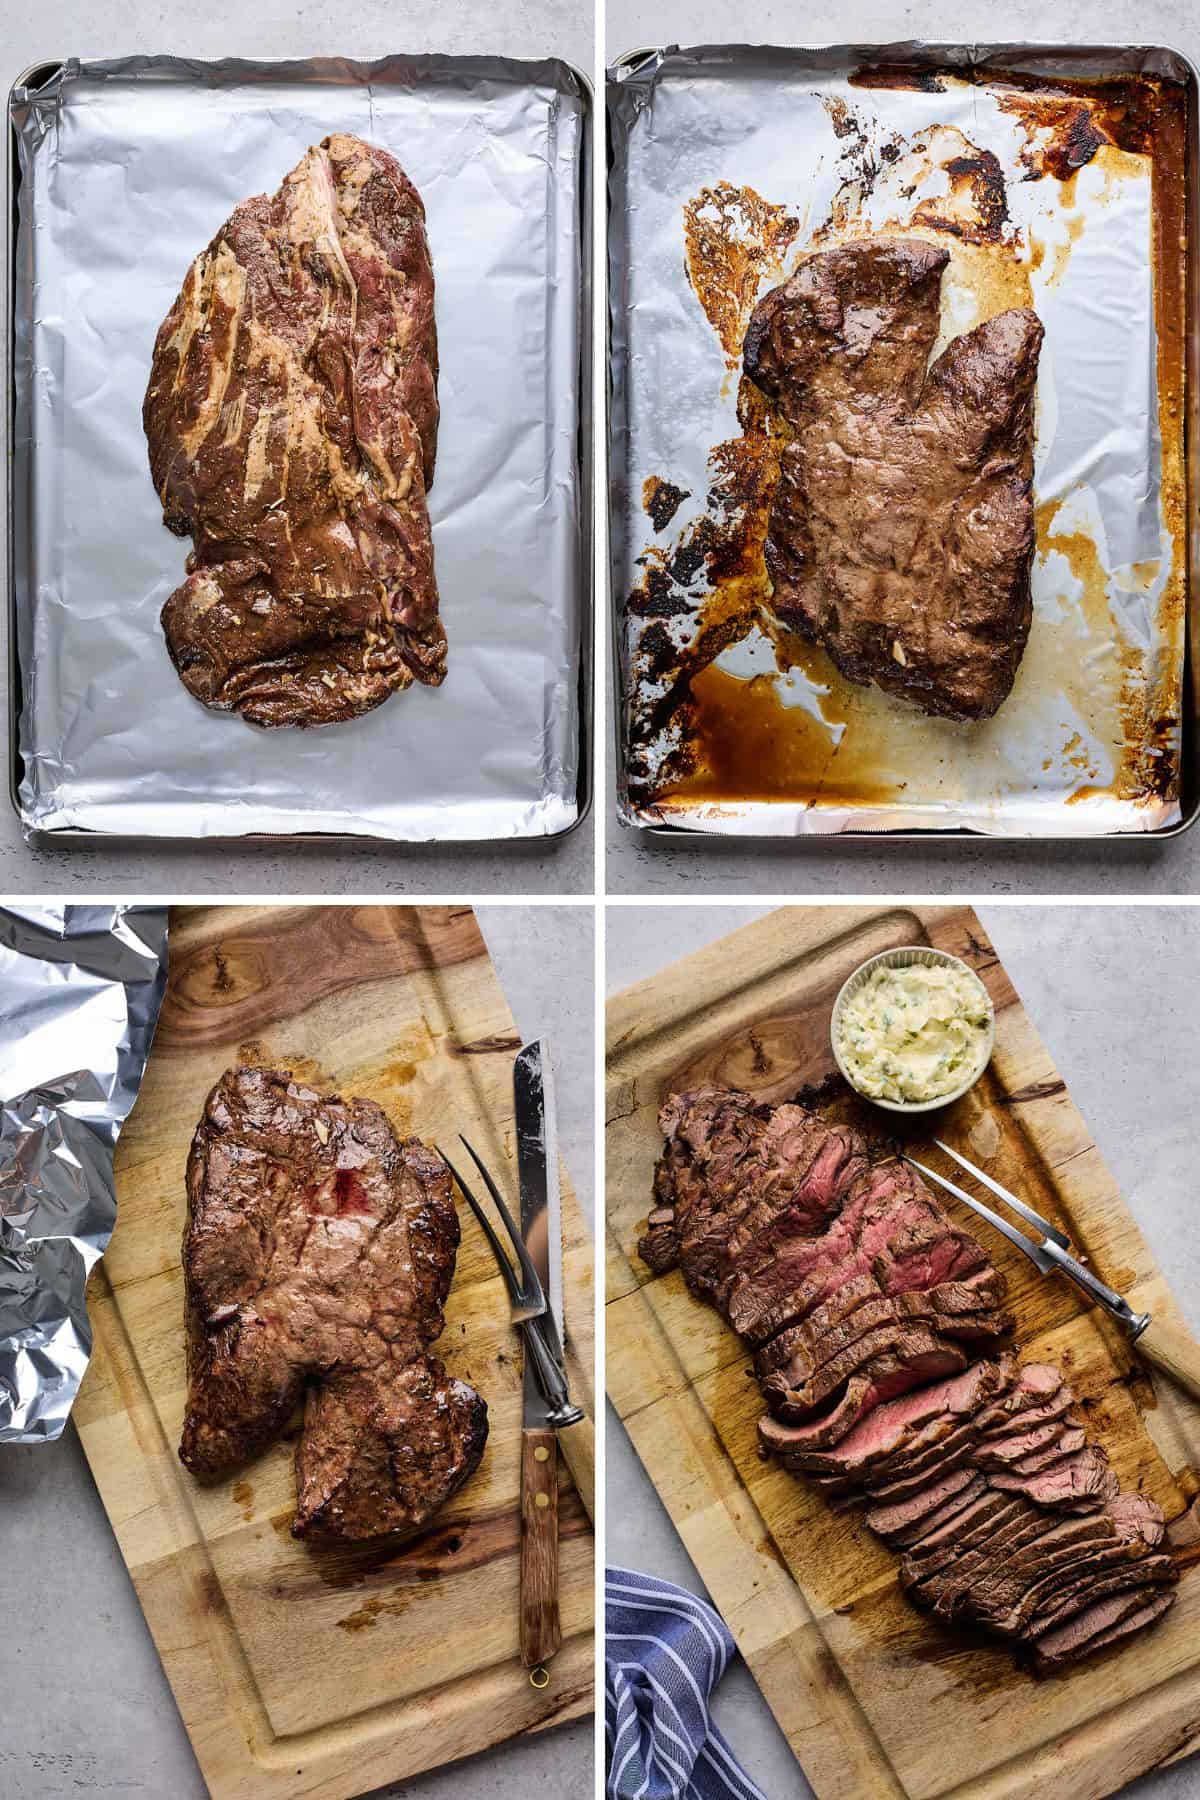 Collage of steps for baking and slicing london broil including the meat before and after baking and slicing the meat